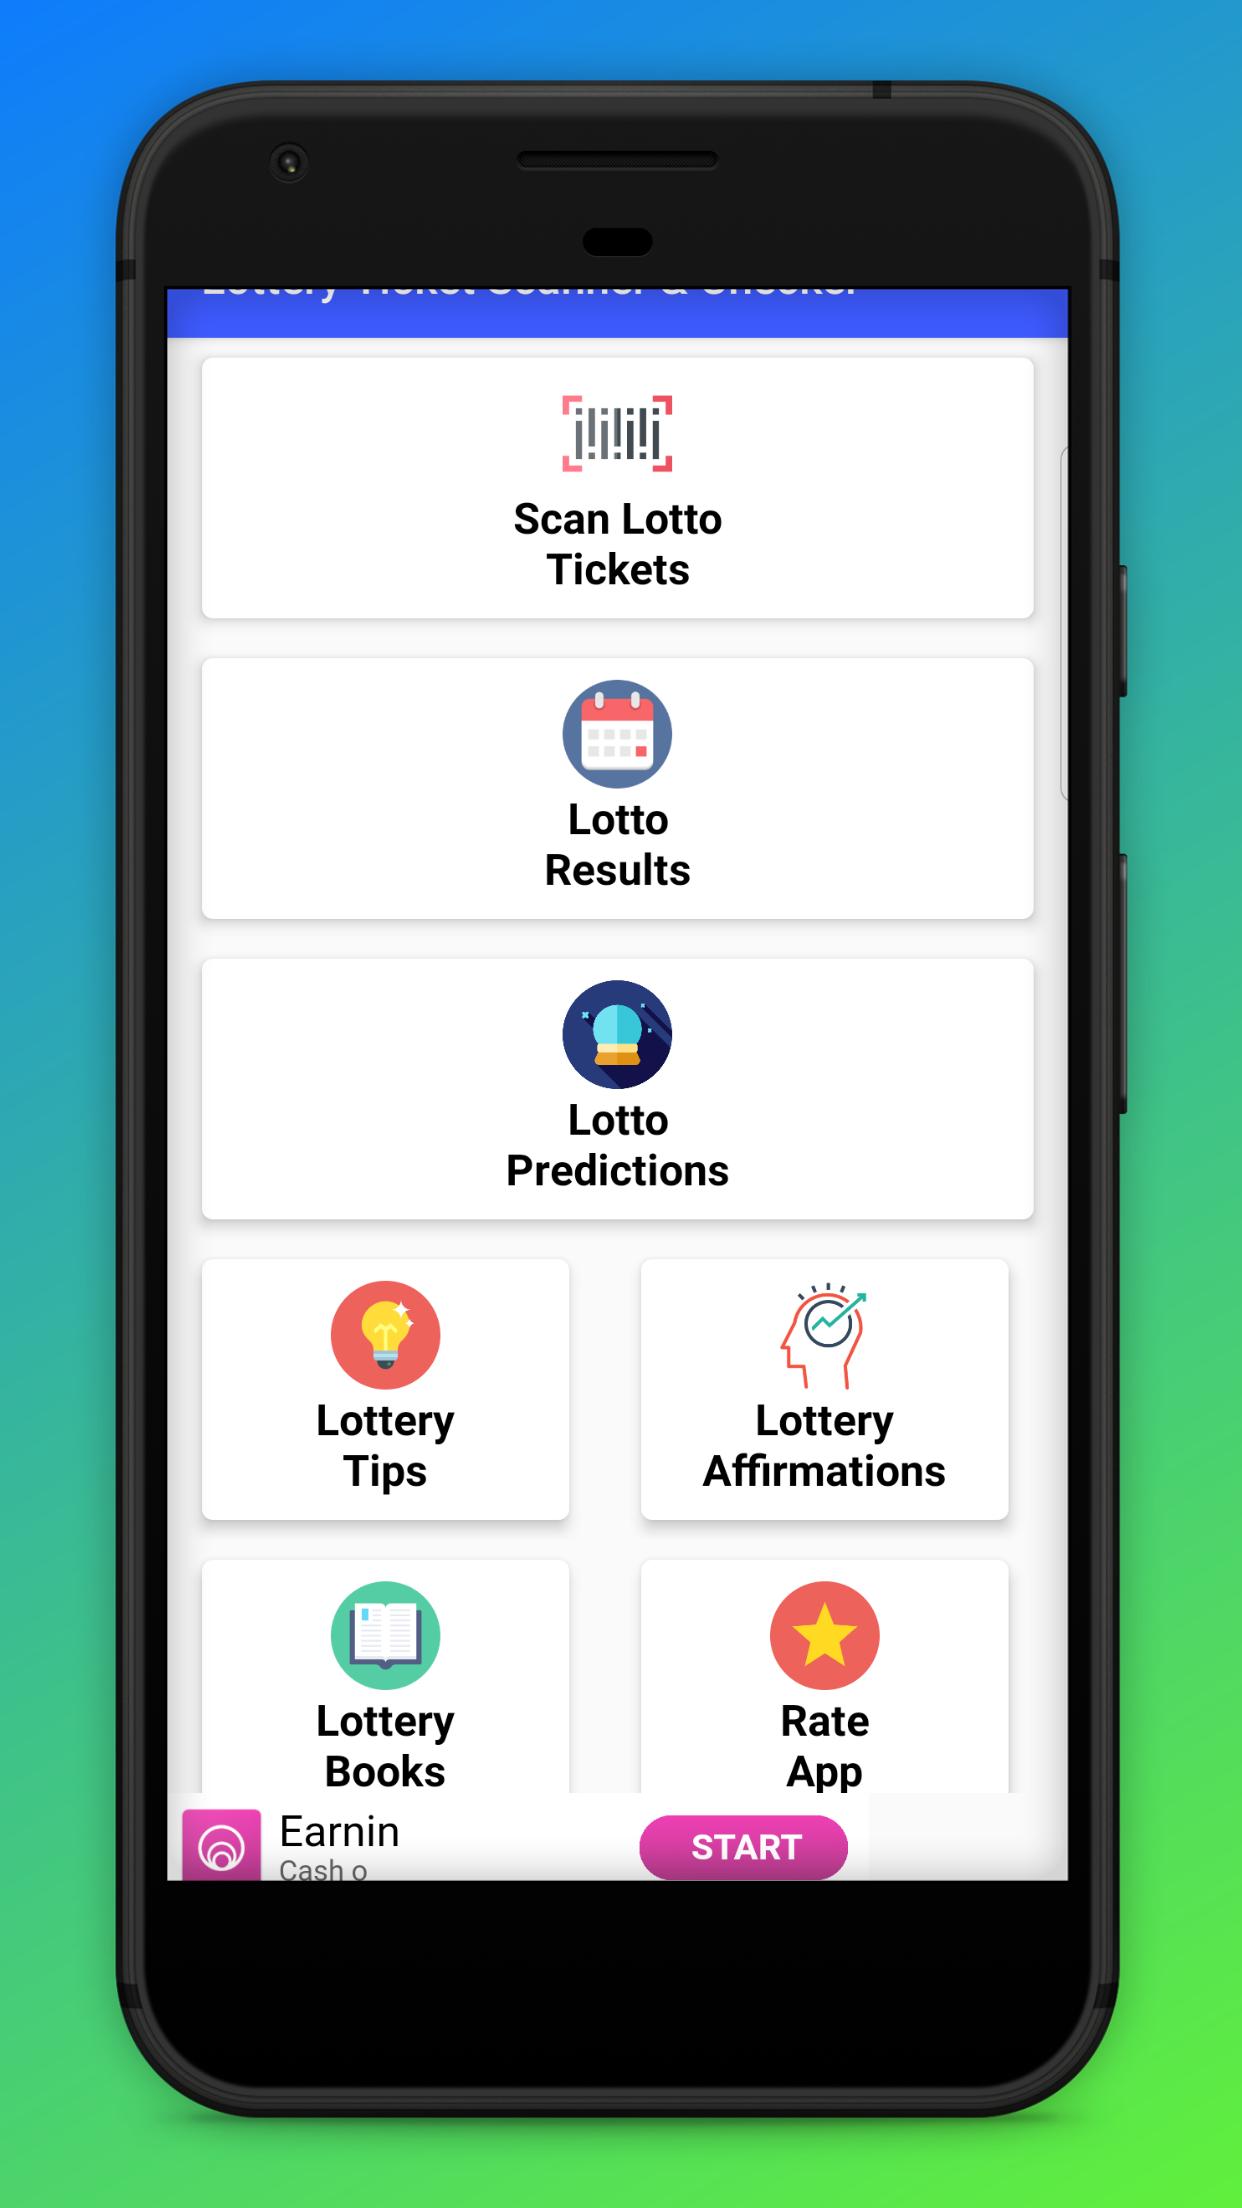 Fortune-Telling or Fool's Errand? Inside a Controversial Lottery Prediction App